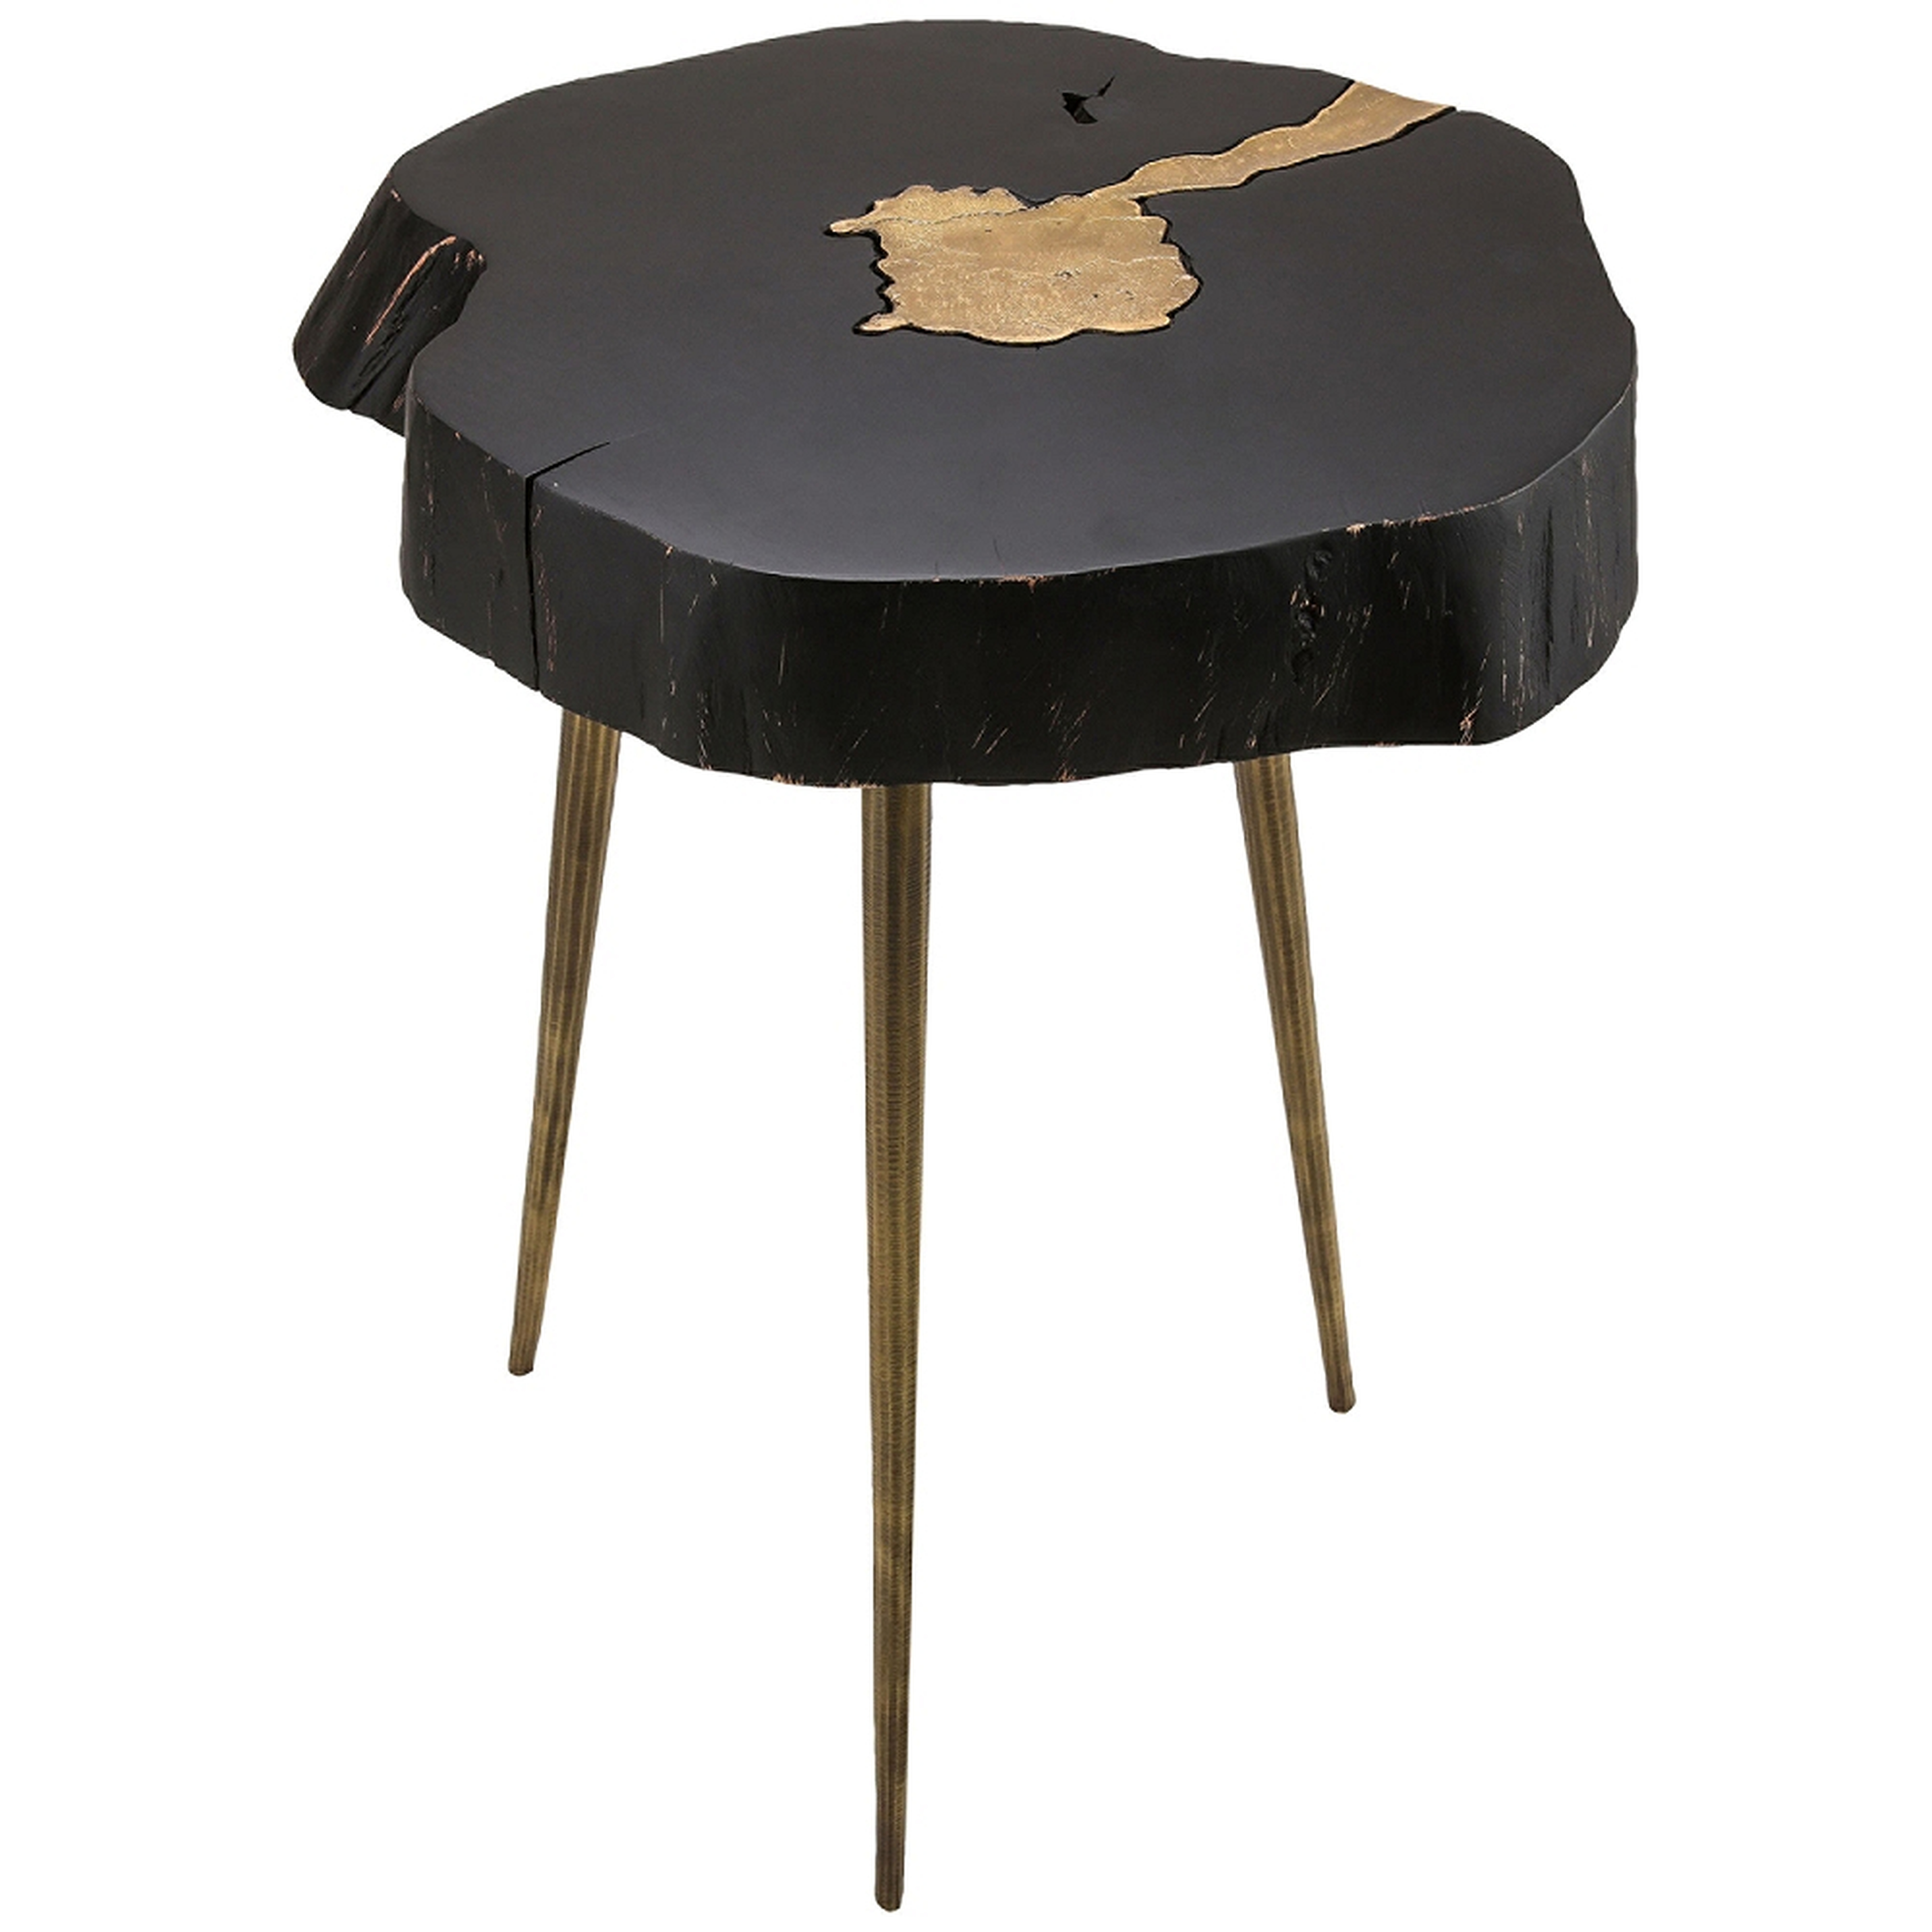 Timber Black and Brass Wooden Side Table - Style # 64T38 - Lamps Plus